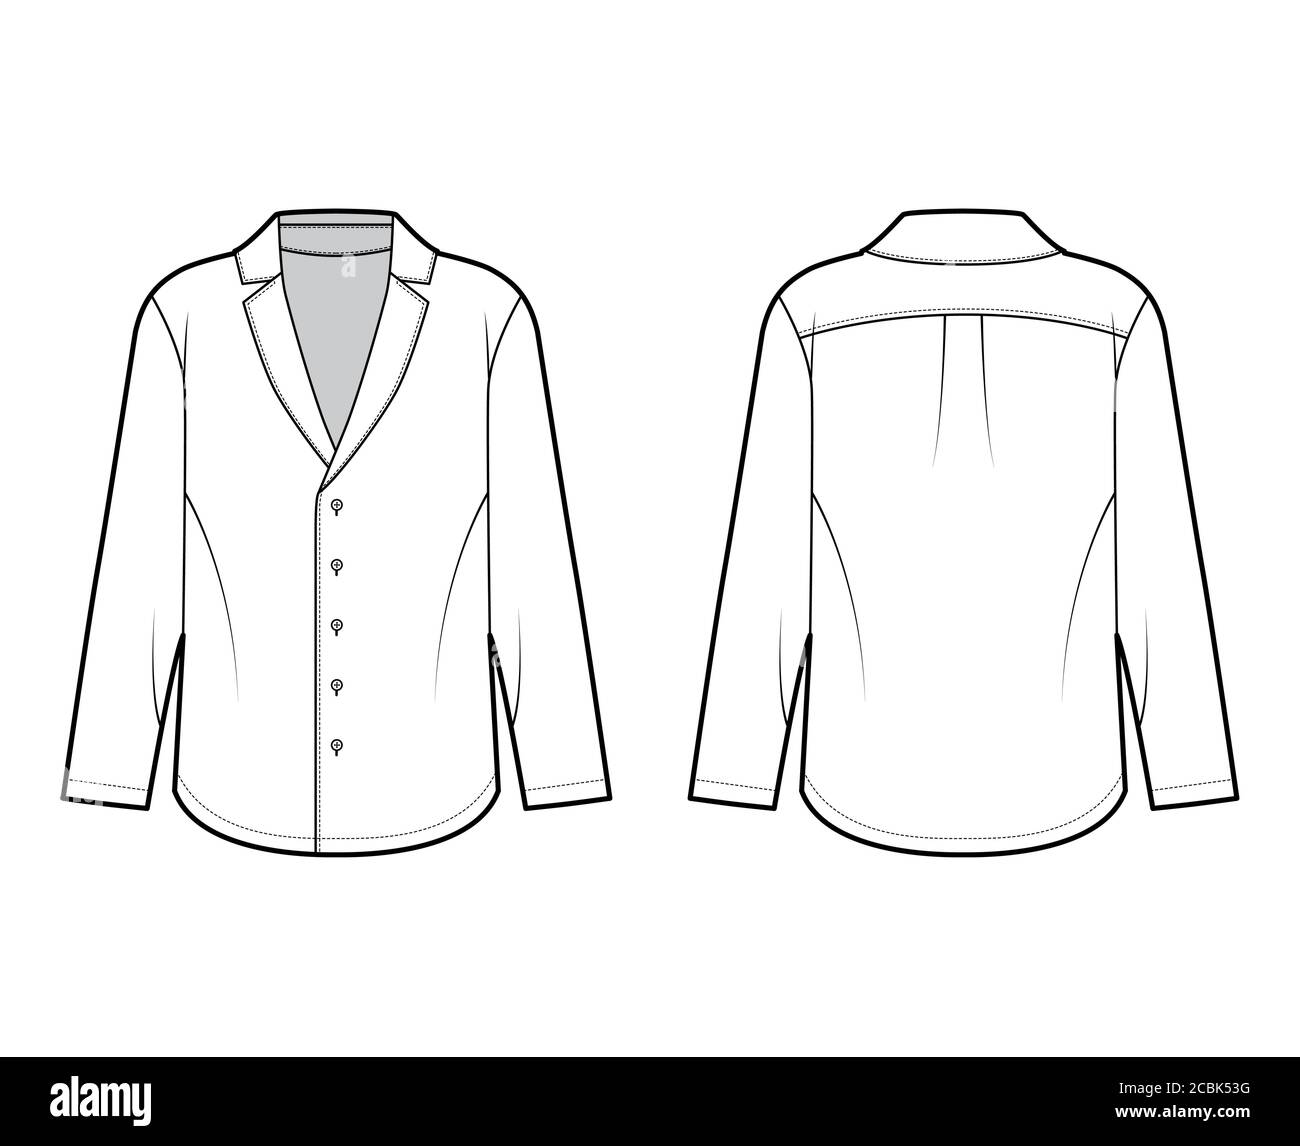 Pajama-style shirt technical fashion illustration with loose silhouette ...